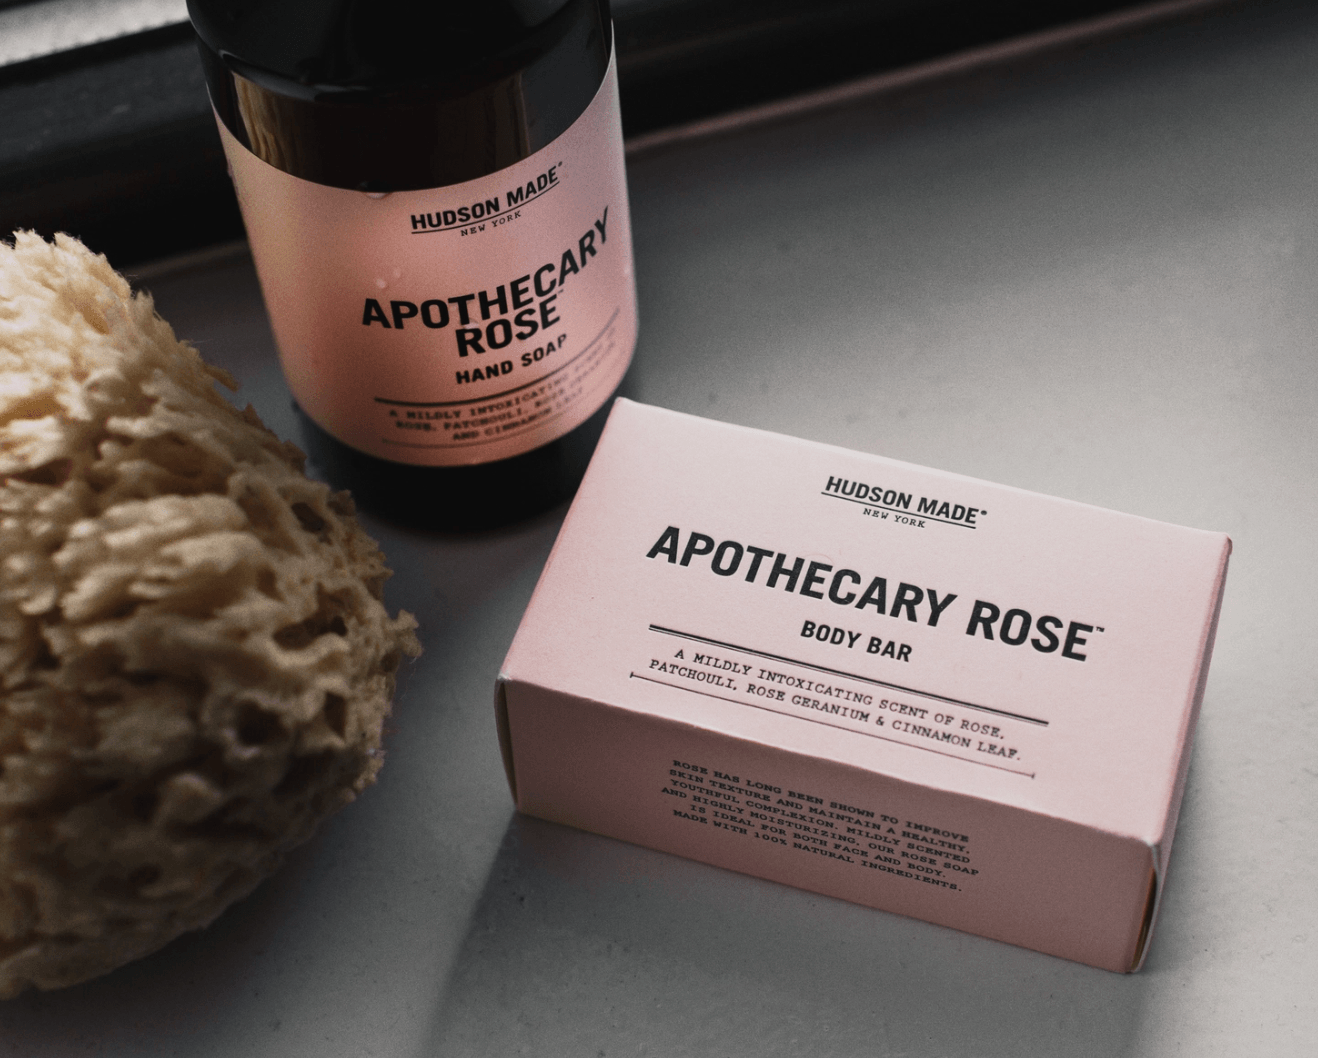 Apothecary Rose Hand Soap by Hudson Made - Haven